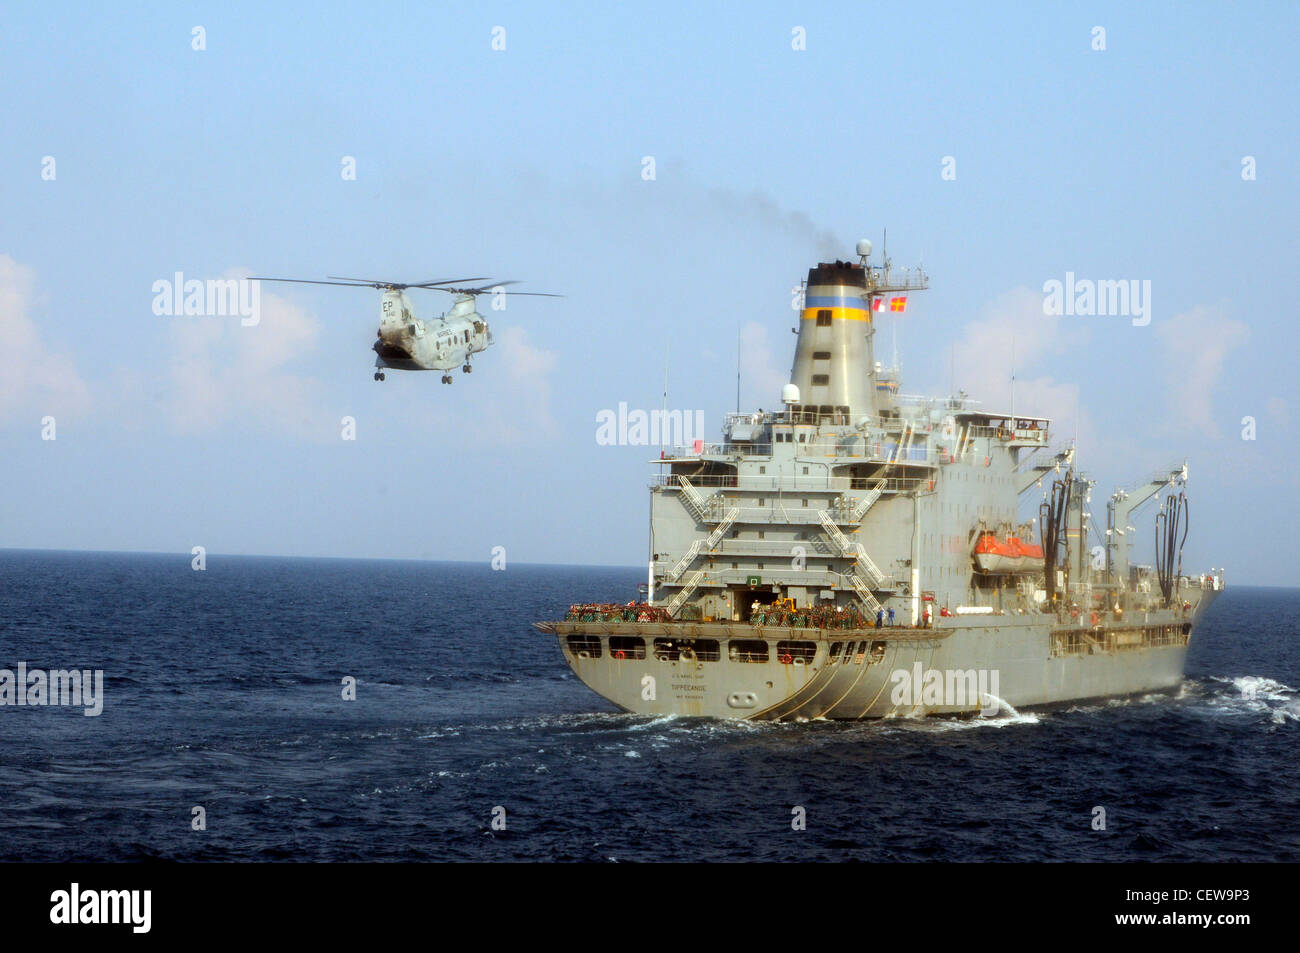 GULF OF THAILAND (Feb 20, 2012)- A CH-46 Sea Knight flies towards the USNS Tippecanoe (T-AO-199) during a replenishment at sea with the forward-deployed amphibious dock landing ship USS Germantown (LSD 42) and USS Tortuga (LSD 46). Germantown, with embarked elements of the 31st Marine Expeditionary Unit (31st MEU,) is currently underway after participating in Exercise Cobra Gold 2012, an annual Thai-U.S. co-sponsored joint and multinational exercise designed to advance security throughout the Asia-Pacific region and enhance interoperability with participating nations. Stock Photo